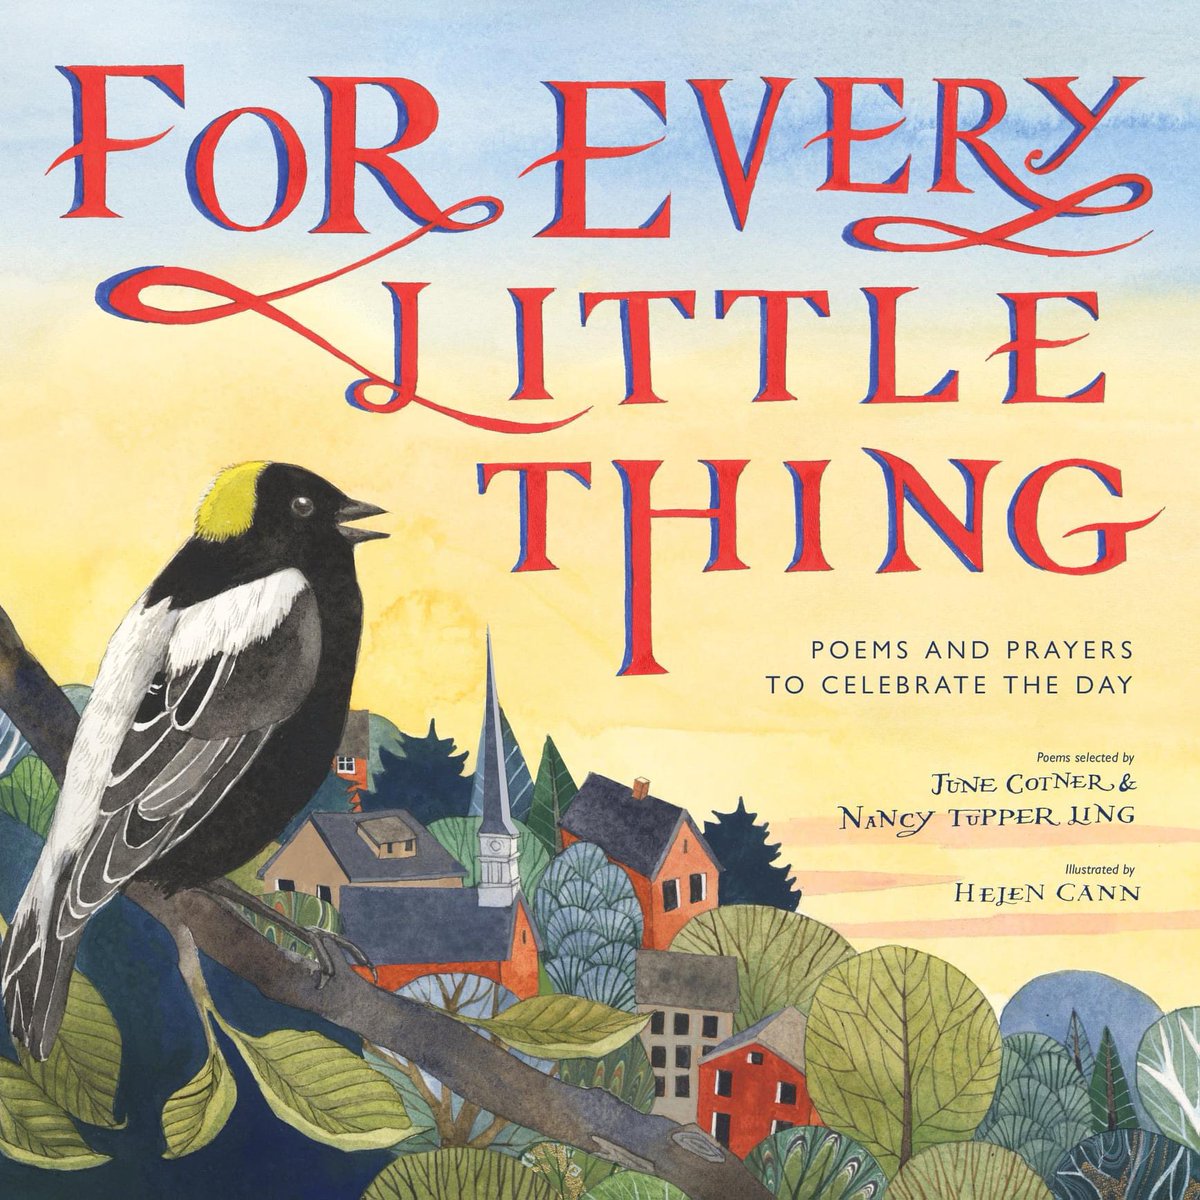 We just love this cover for the upcoming picture book of poems FOR EVERY LITTLE THING compiled by @JuneCotner and our own Picture Book Pal @nancytupperling . 💕Illustrations from Helen Cann. 
These uplifting poems will be available to read in September 2021. #kidlit #book